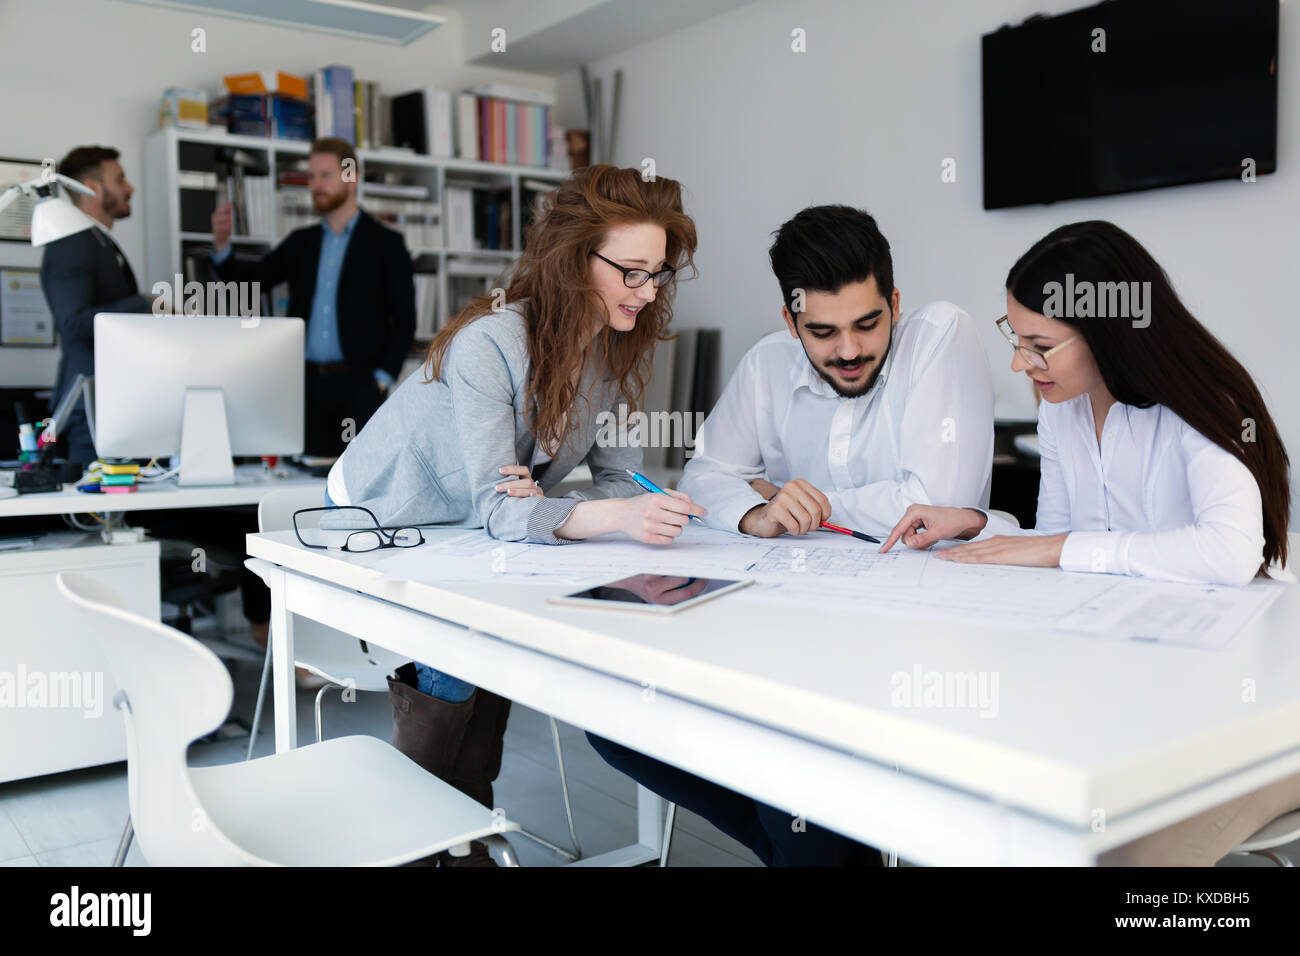 Group of architects working together on project Stock Photo